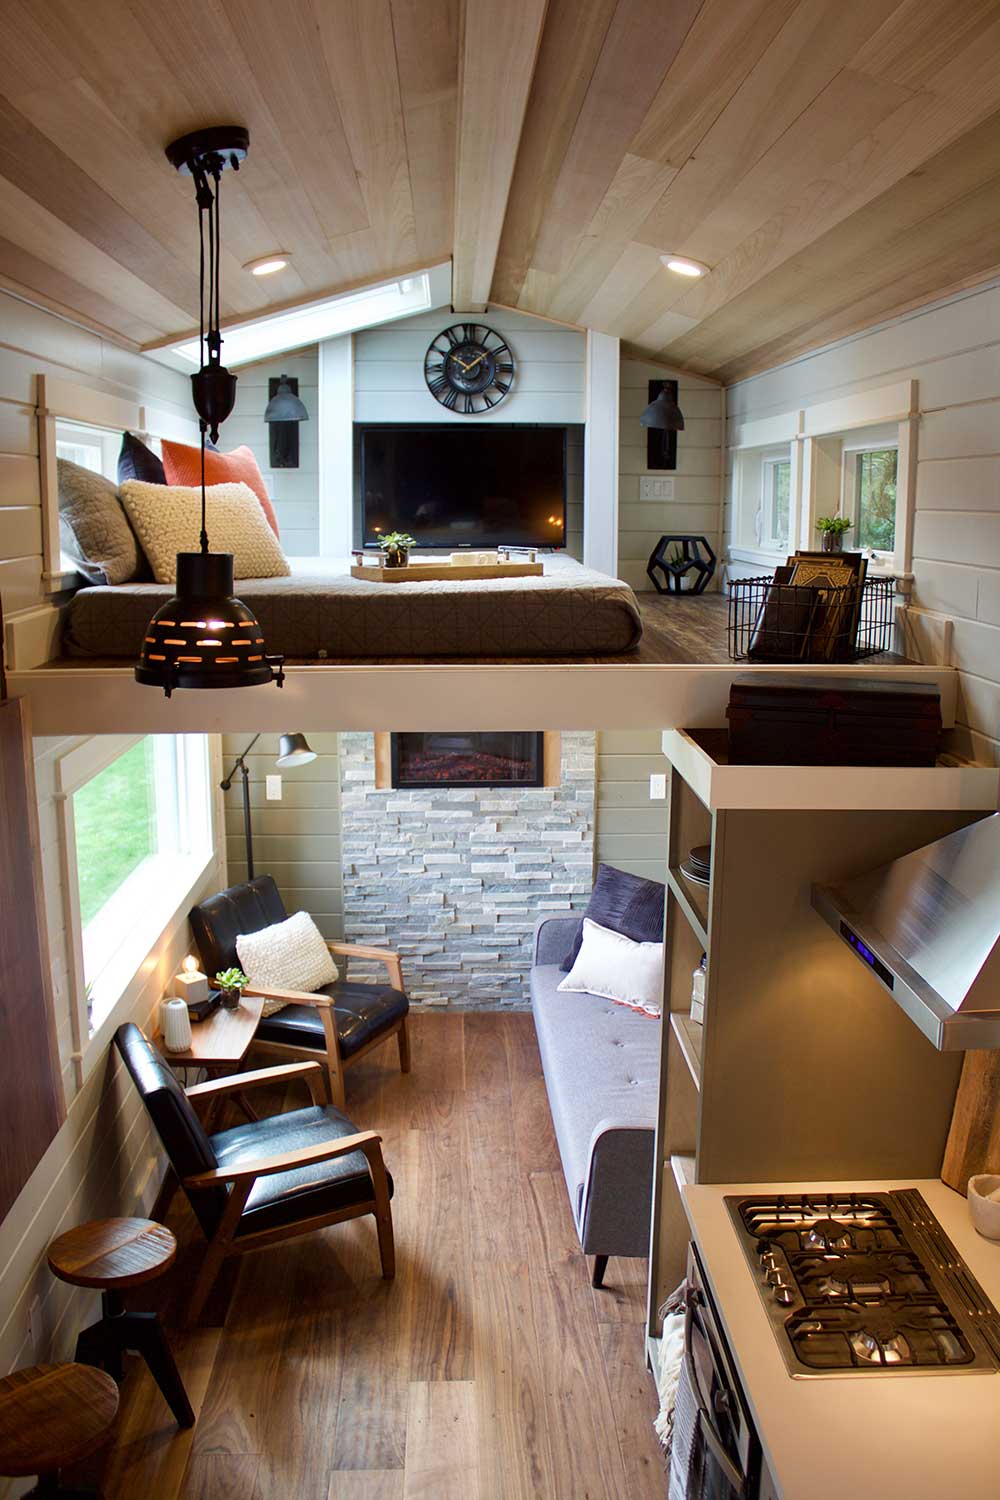 Interior of the Modern Mountain House custom tiny house showing loft and living room